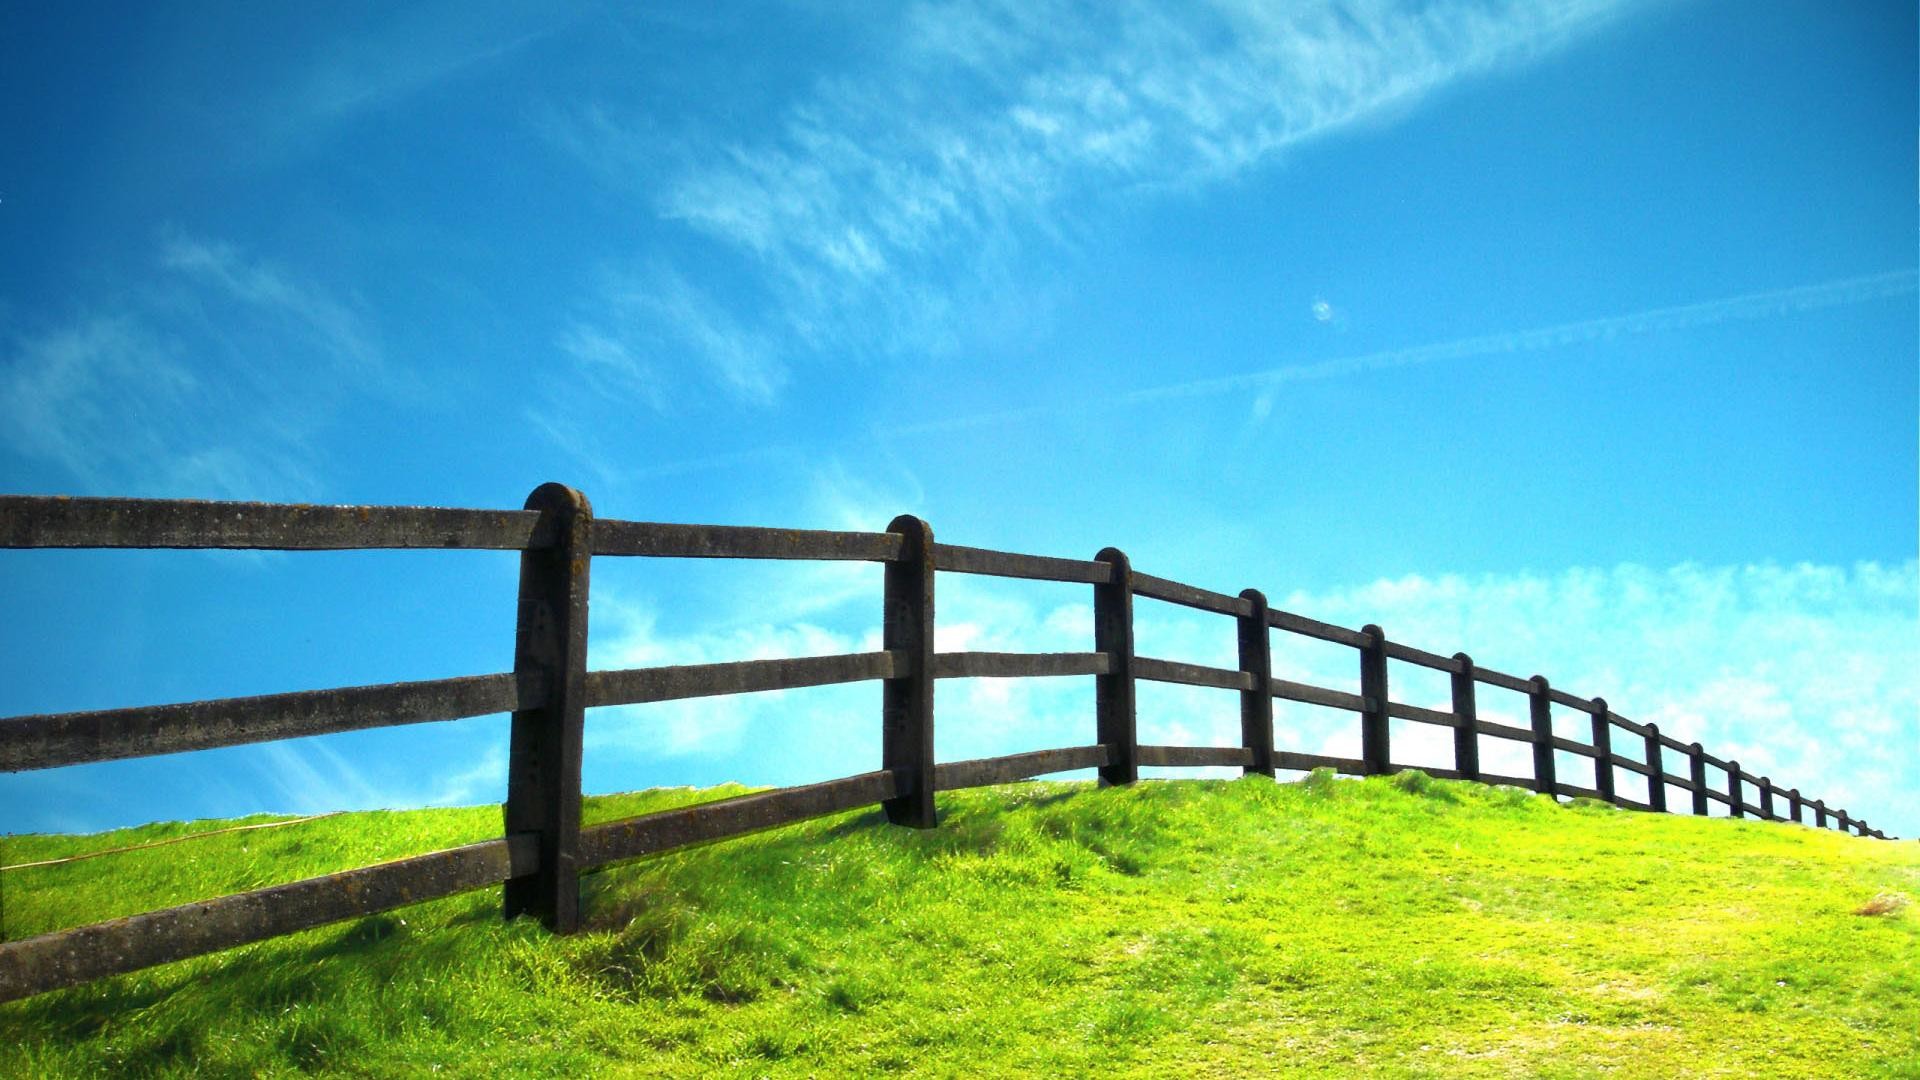 1920x1080 Hd Grassland And Fence Nature Scenery Background Widescreen and HD .